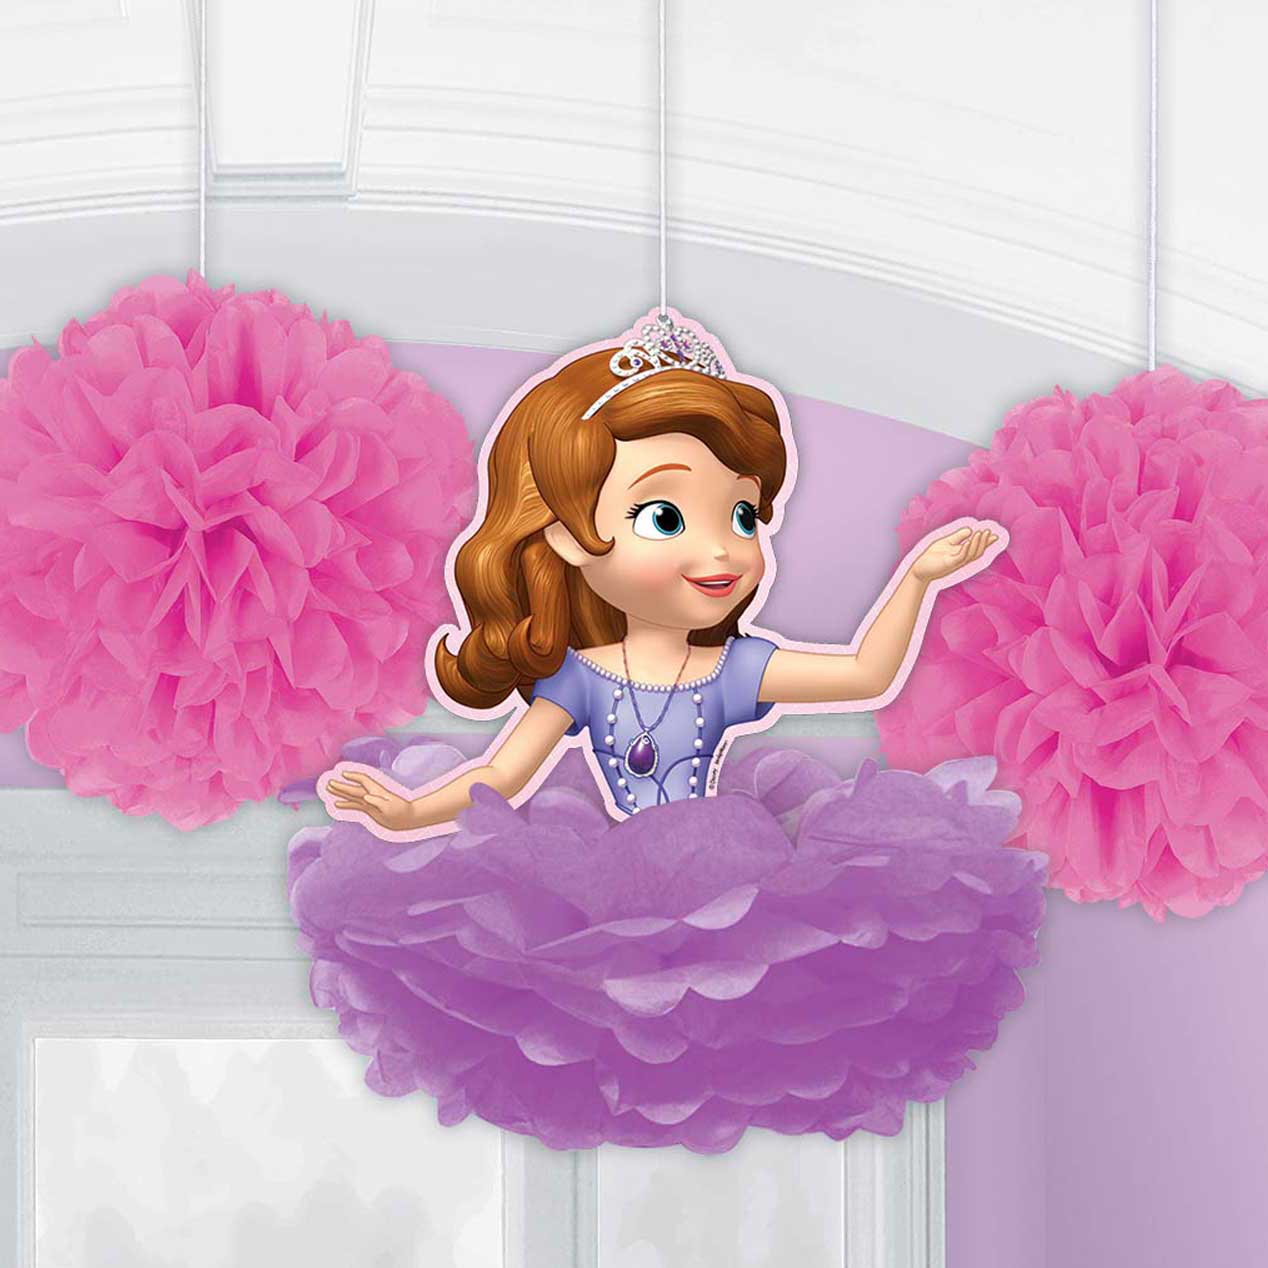 Sofia The First Fluffy Decorations 3pcs Decorations - Party Centre - Party Centre